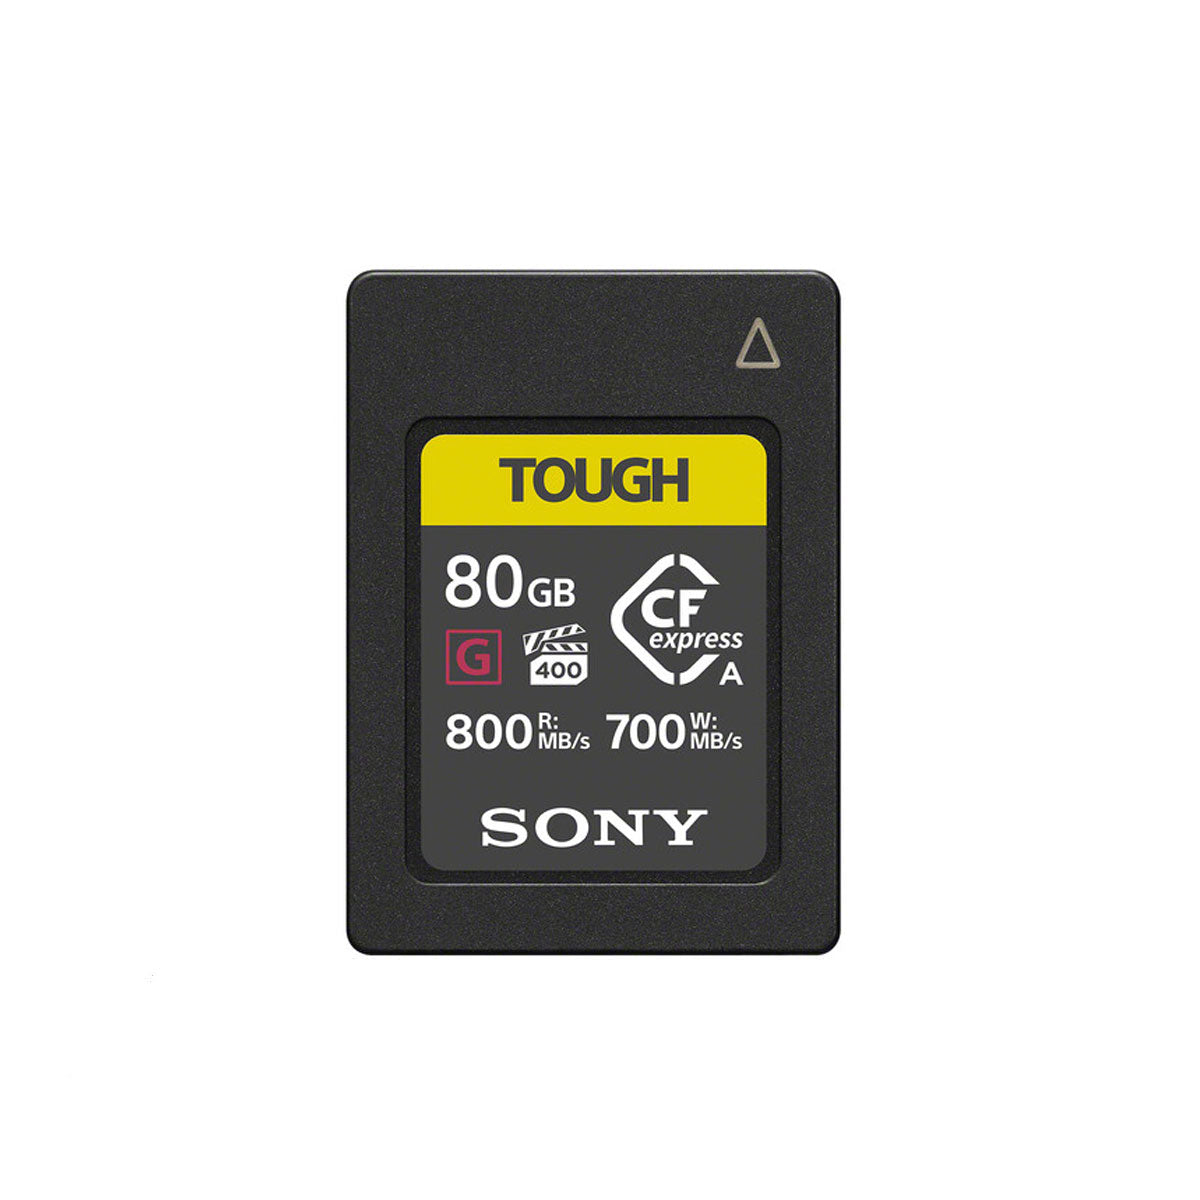 Sony CFexpress Type A Card, 80GB, 800MB/s